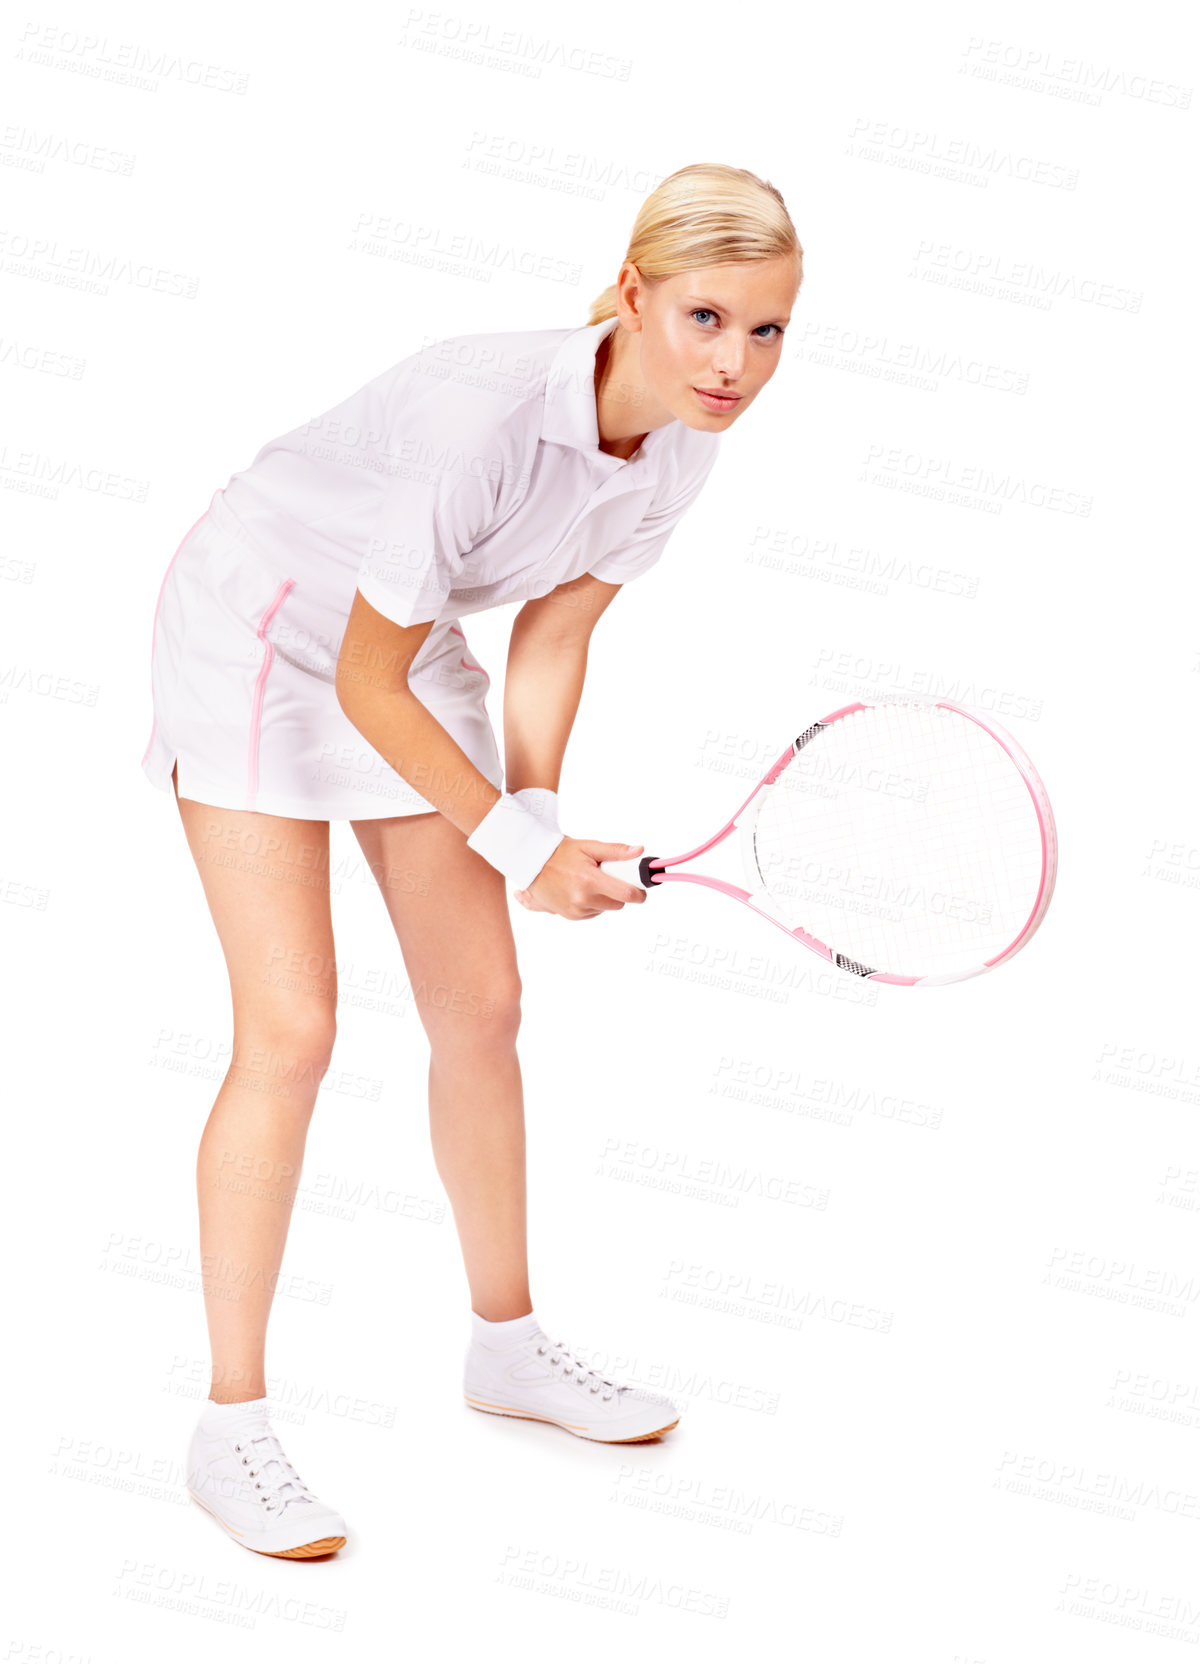 Buy stock photo Full body portrait of an attractive young woman getting ready to return the serve